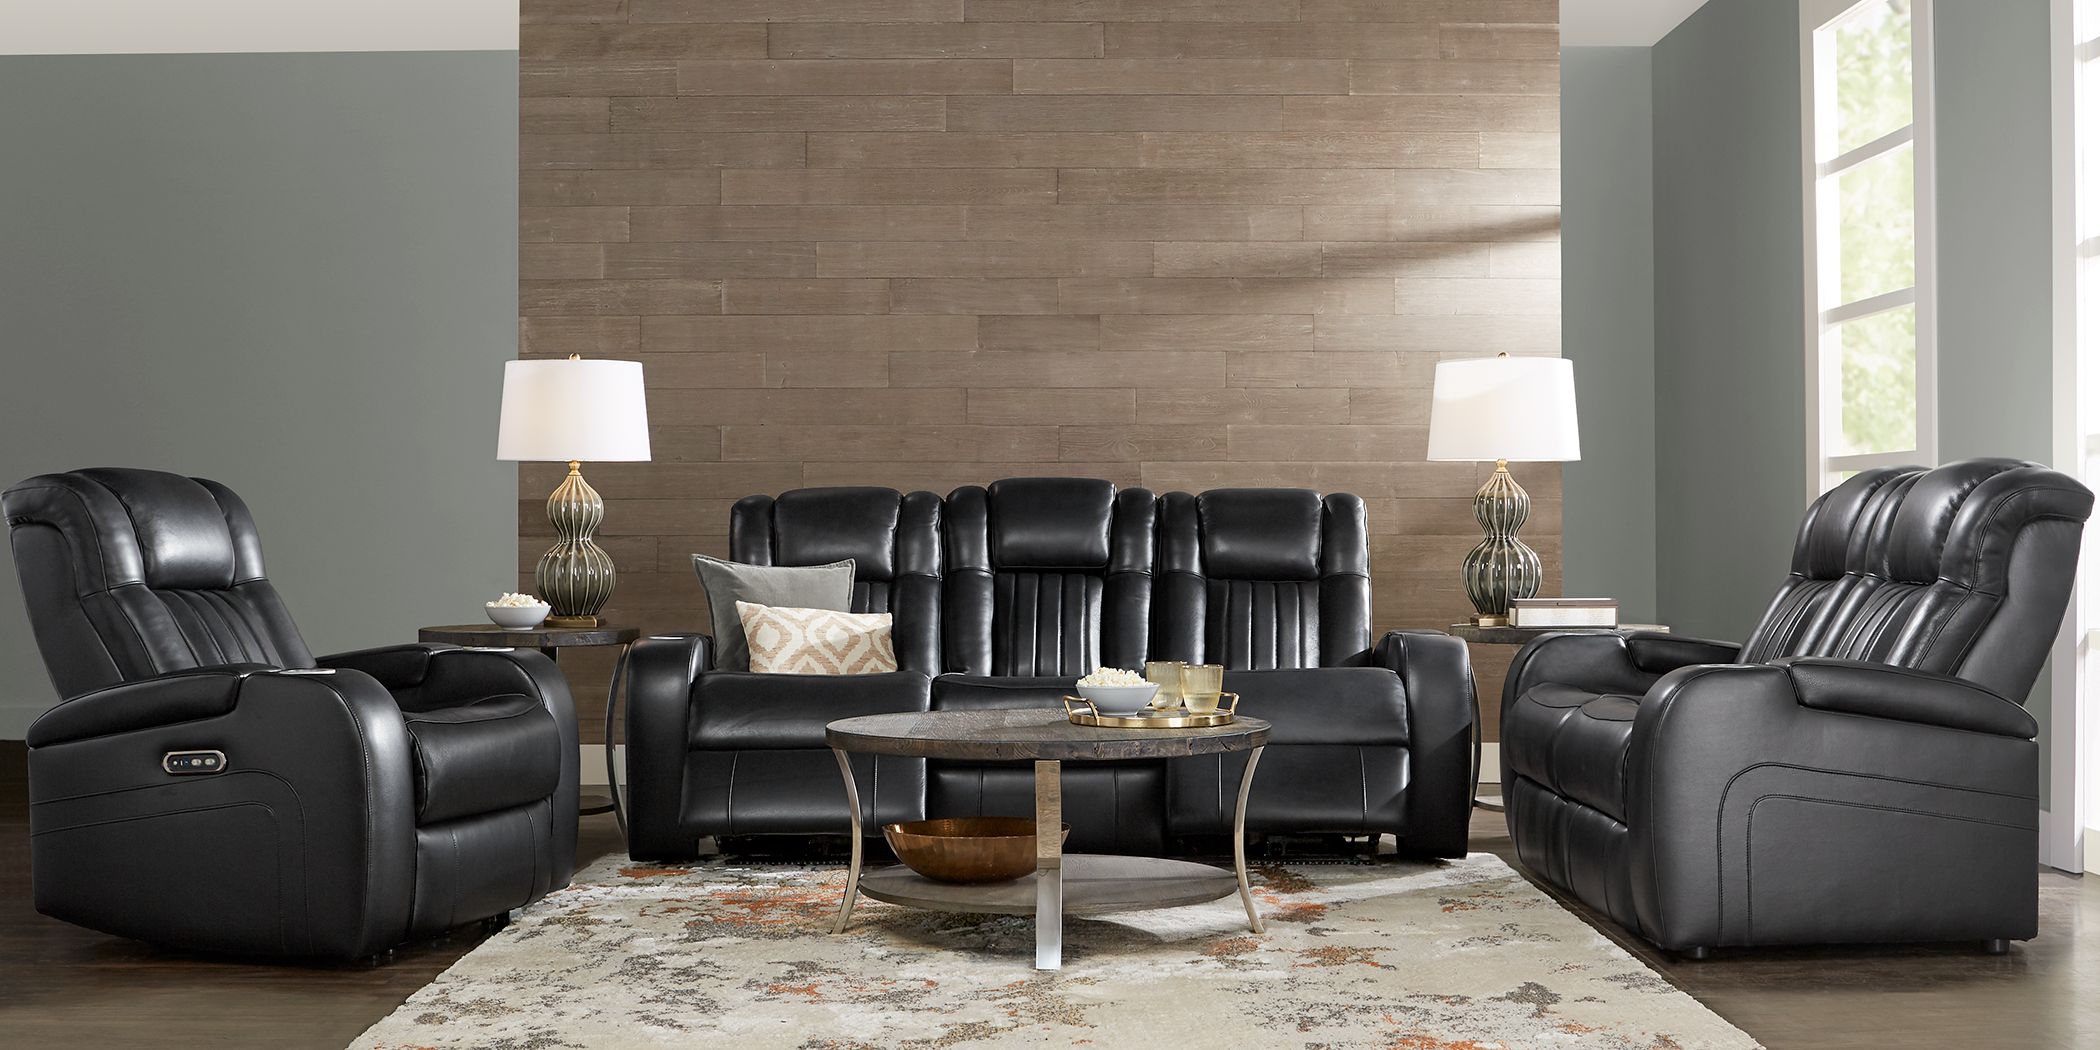 Kwality Imports Jenma Leathaire Recliner Complete Set in Black 3 pcs Set with Sofa, Love Seat and Chair